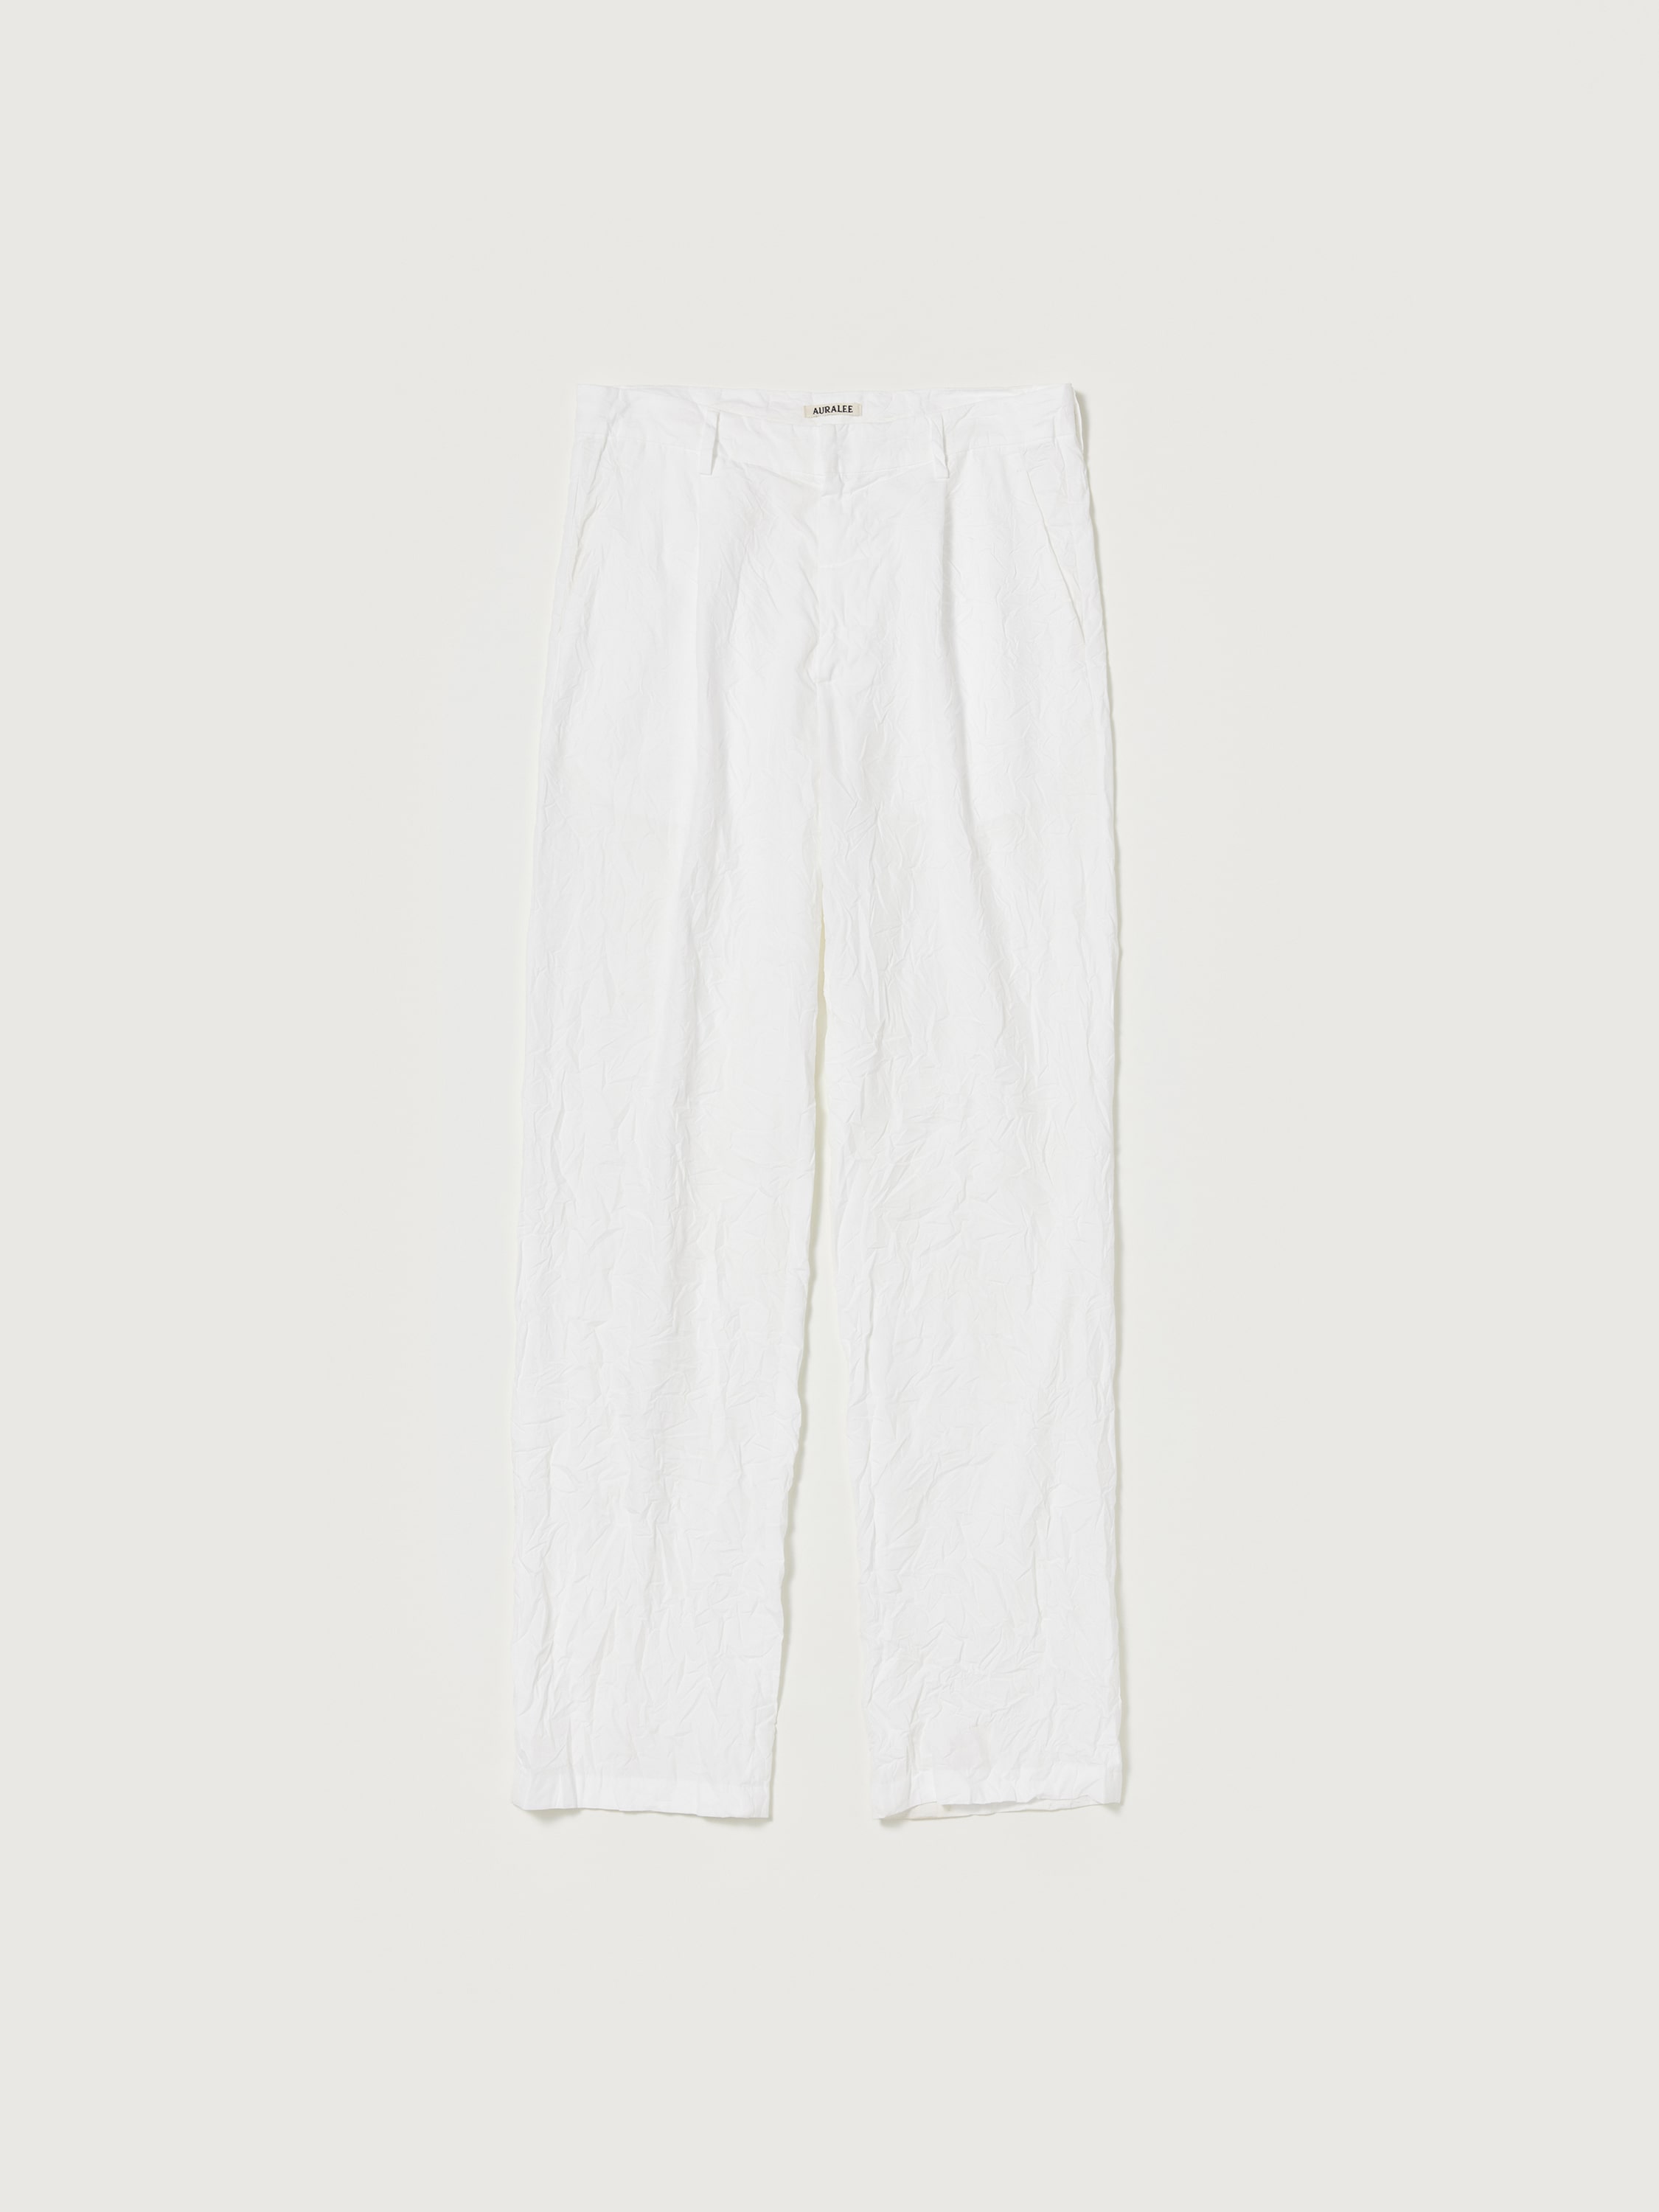 WRINKLED WASHED FINX TWILL PANTS 詳細画像 WHITE 5